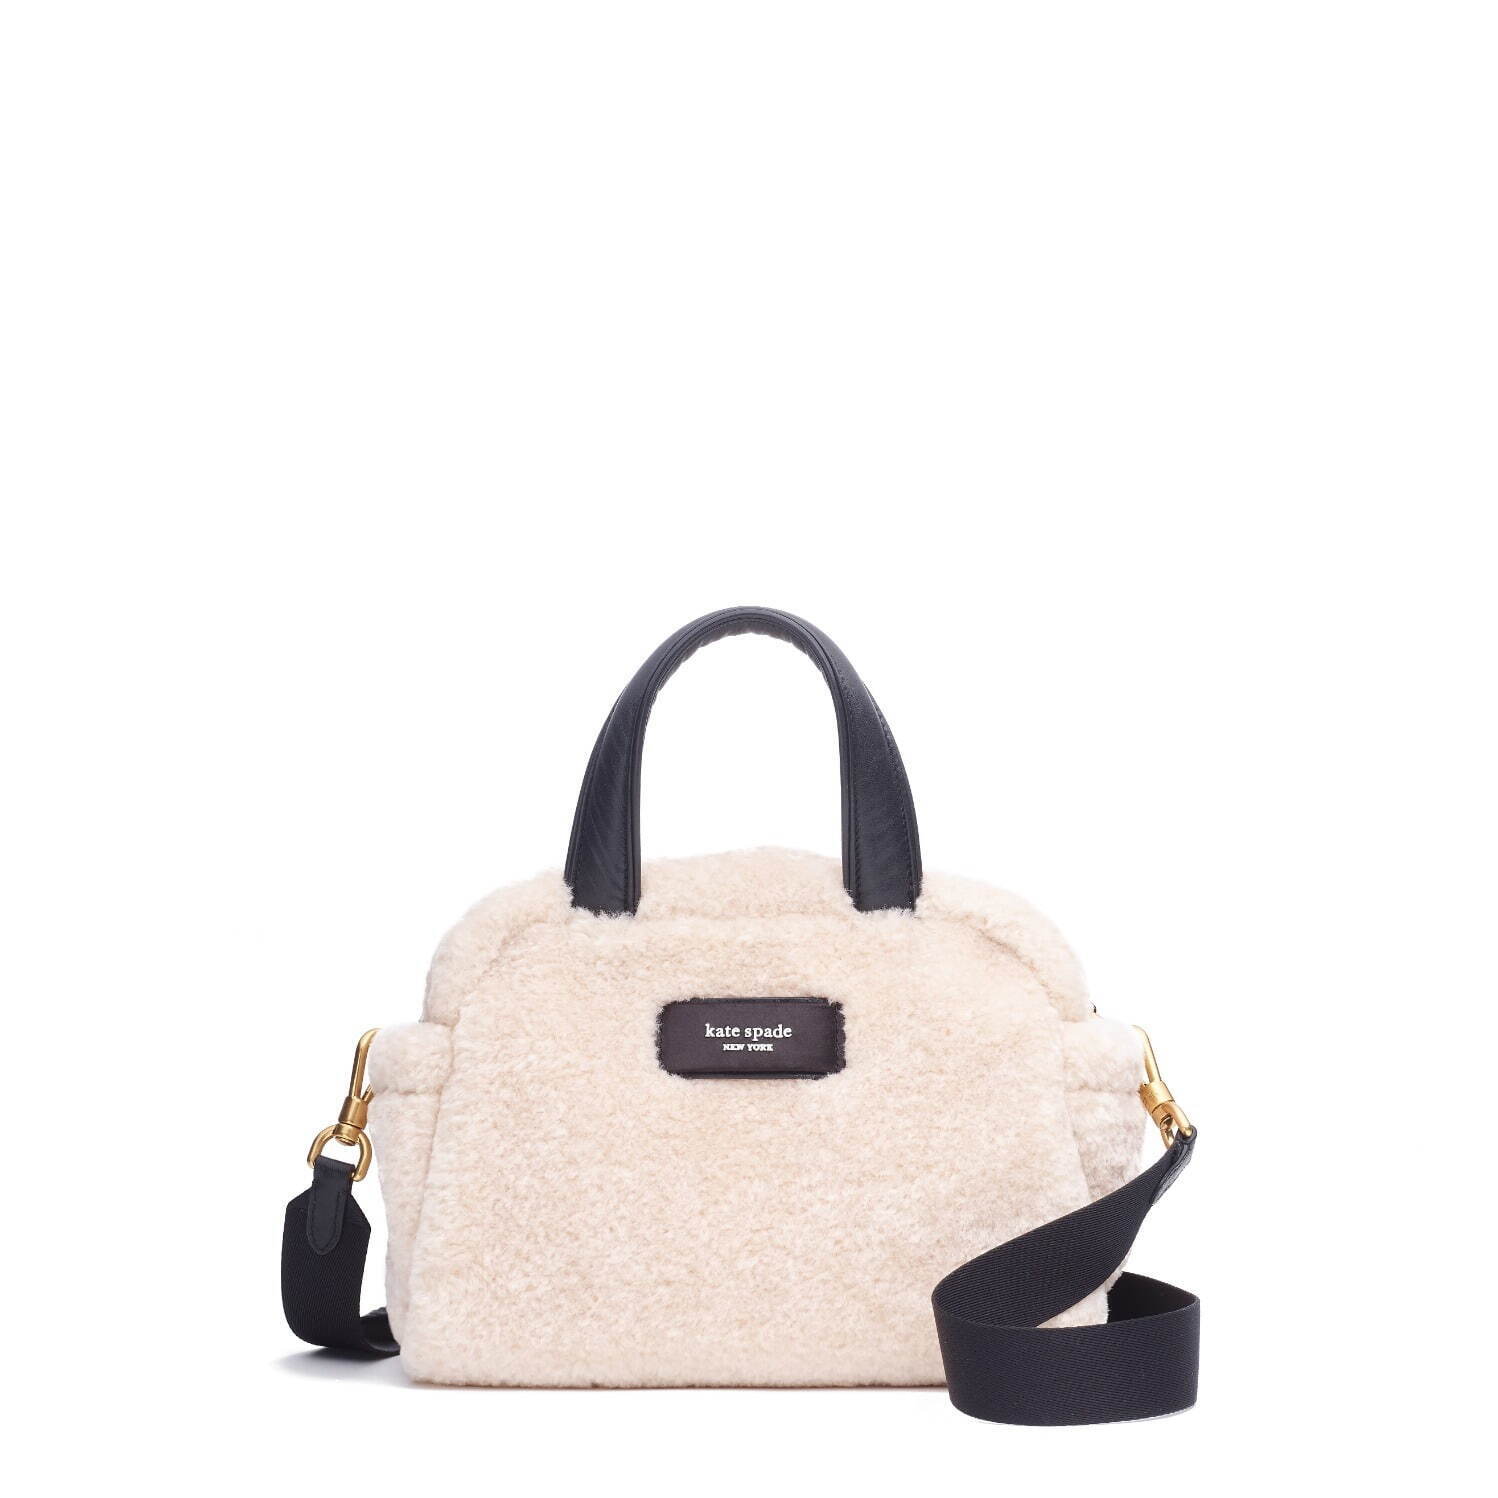 après chic faux shearling puffed satchel in natural 60,500円
(H18×W24×D12cm)